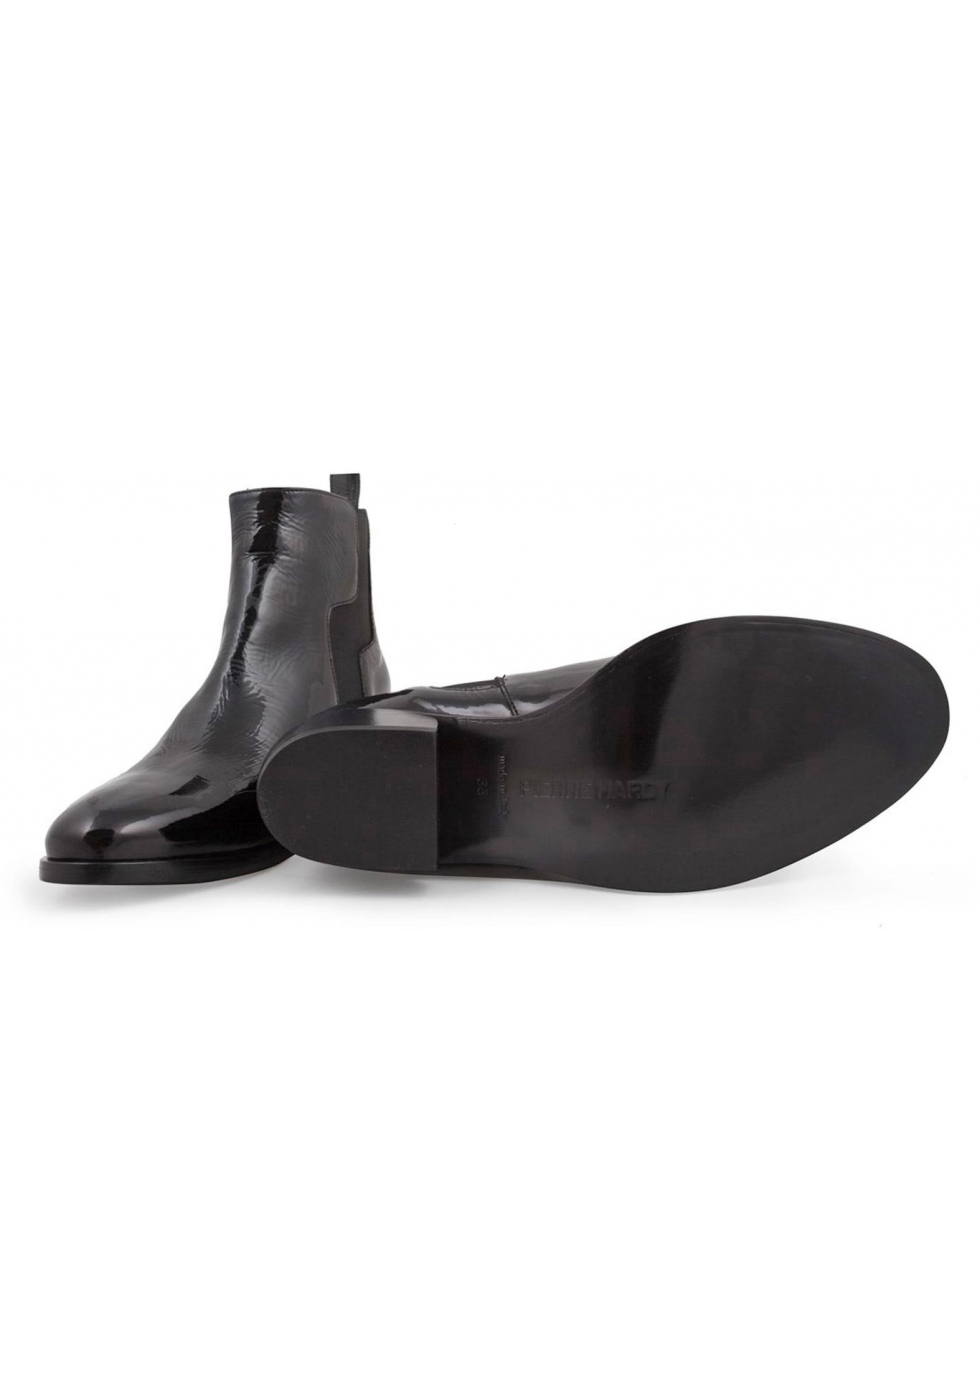 Pierre Hardy women's ankle boots in black patent leather - Italian Boutique